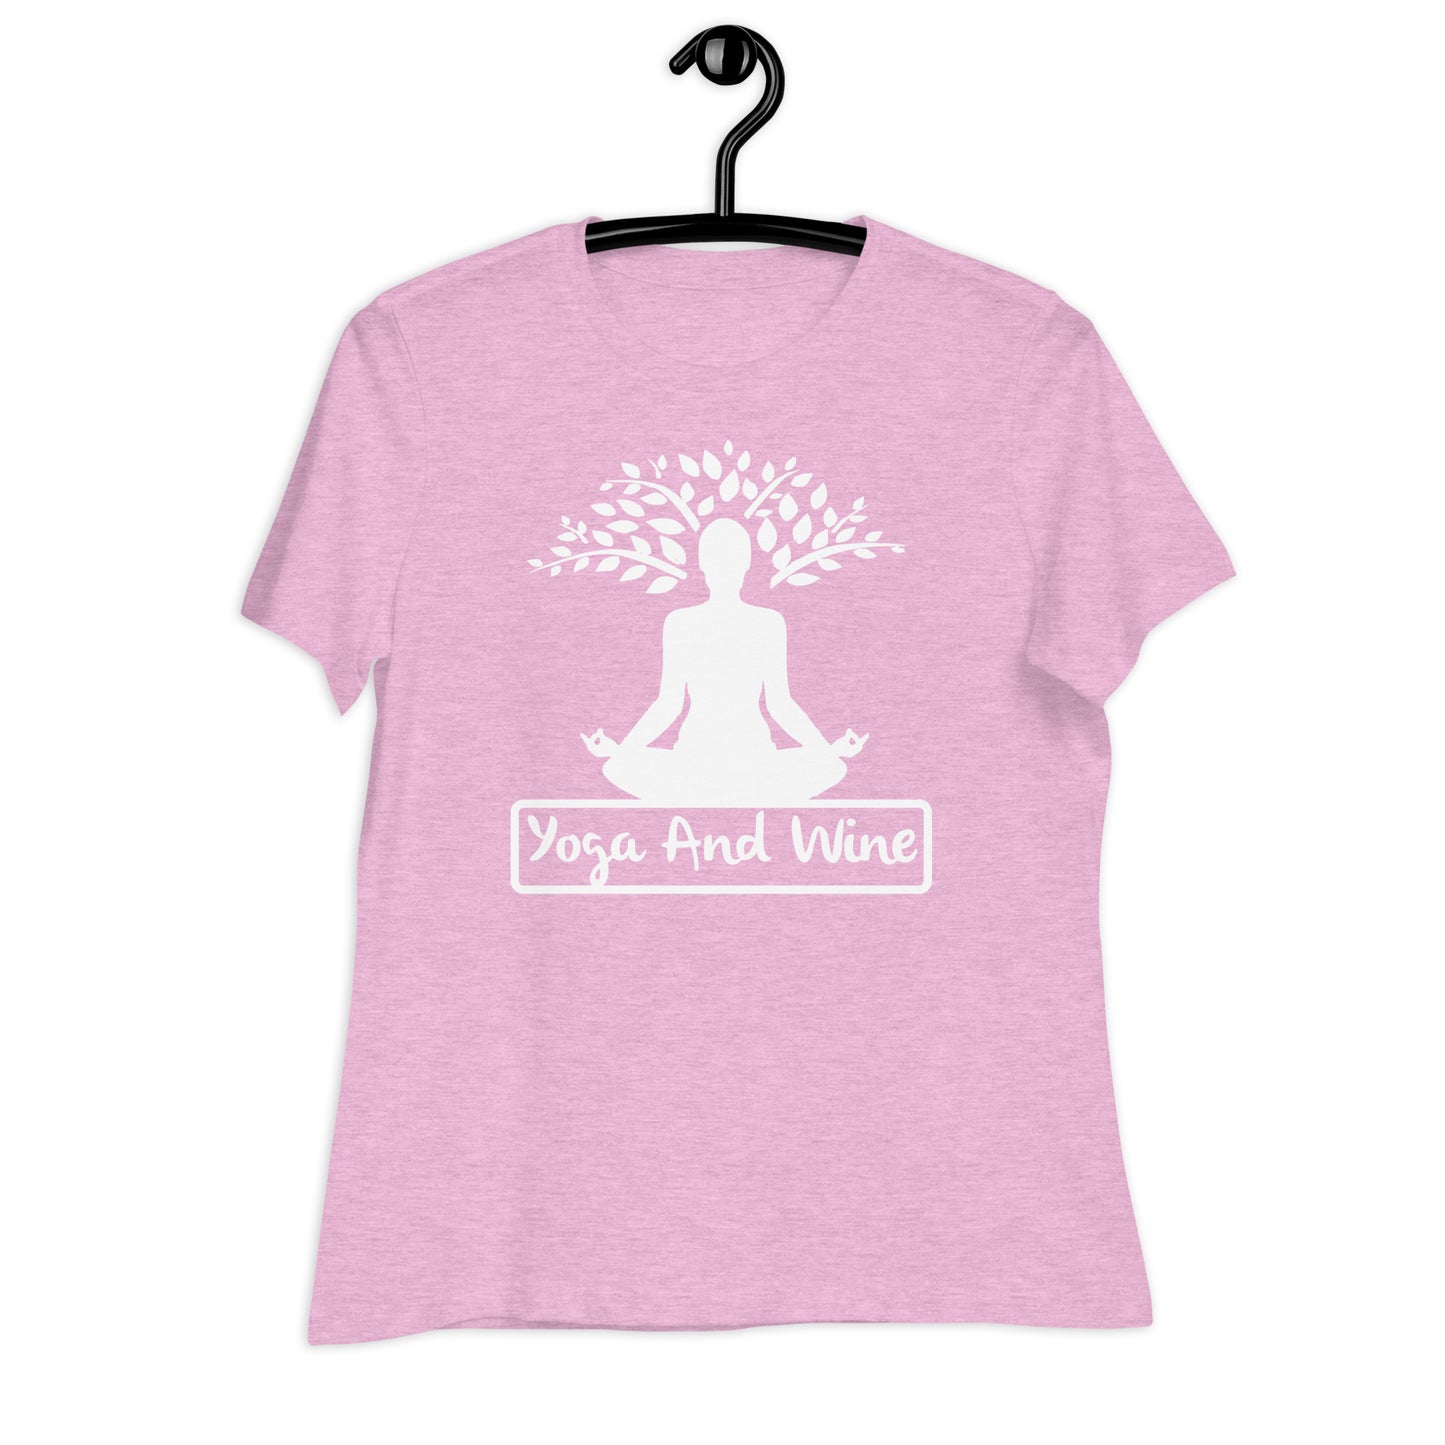 Yoga And Wine - Women's Relaxed T-Shirt